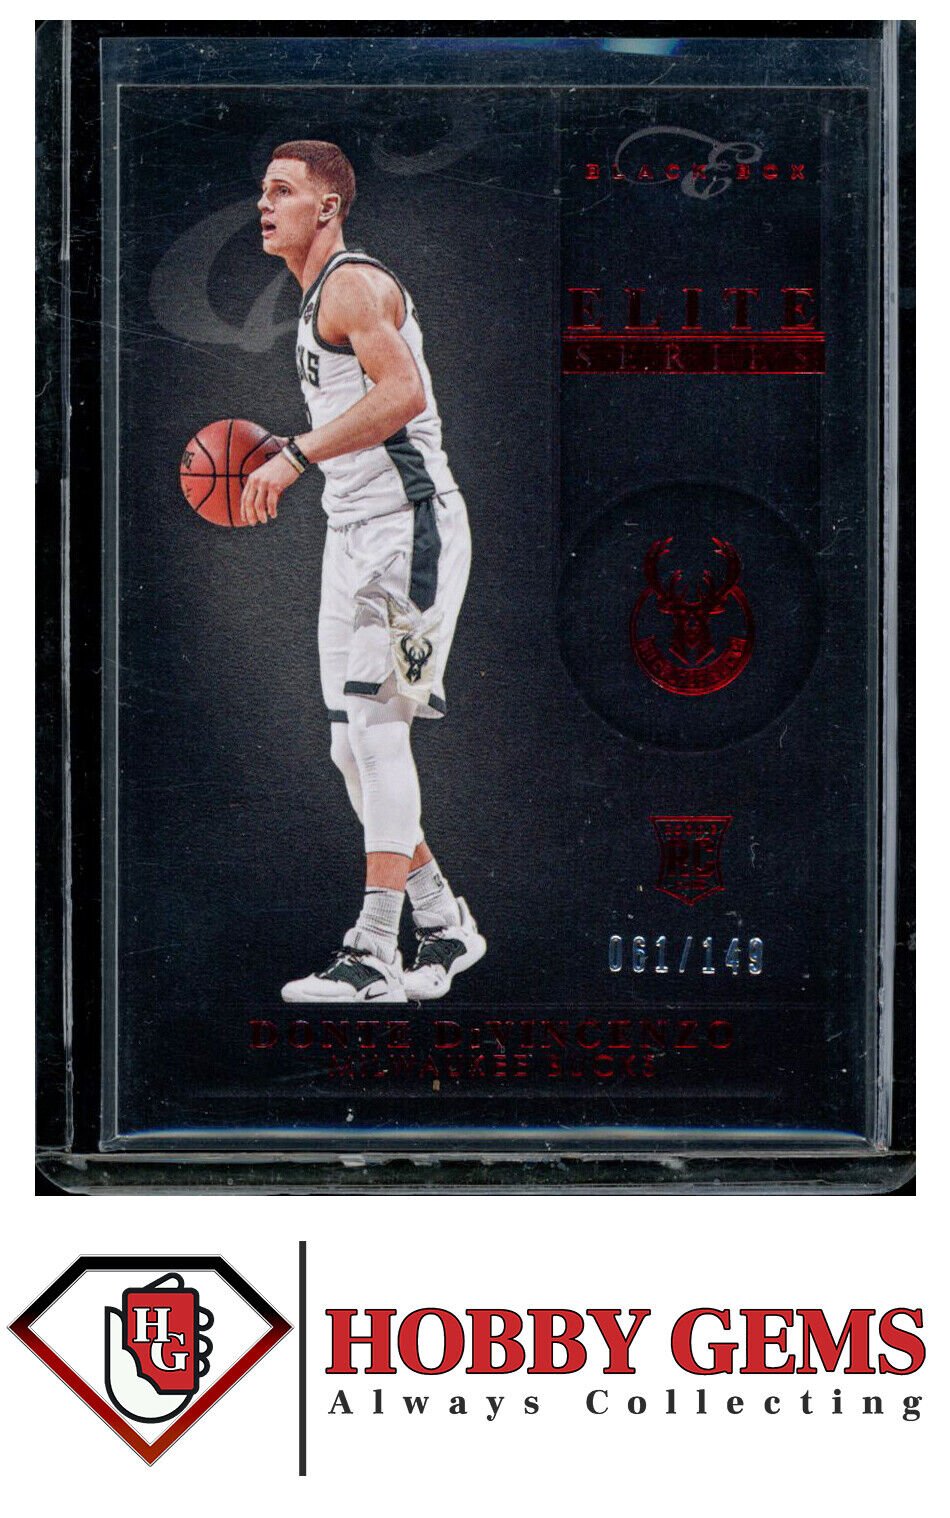 DONTE DIVINCENZO 2018-19 Panini Chronicles RC Elite Black Box Red 61/149 #330 Basketball Parallel Serial Numbered - Hobby Gems